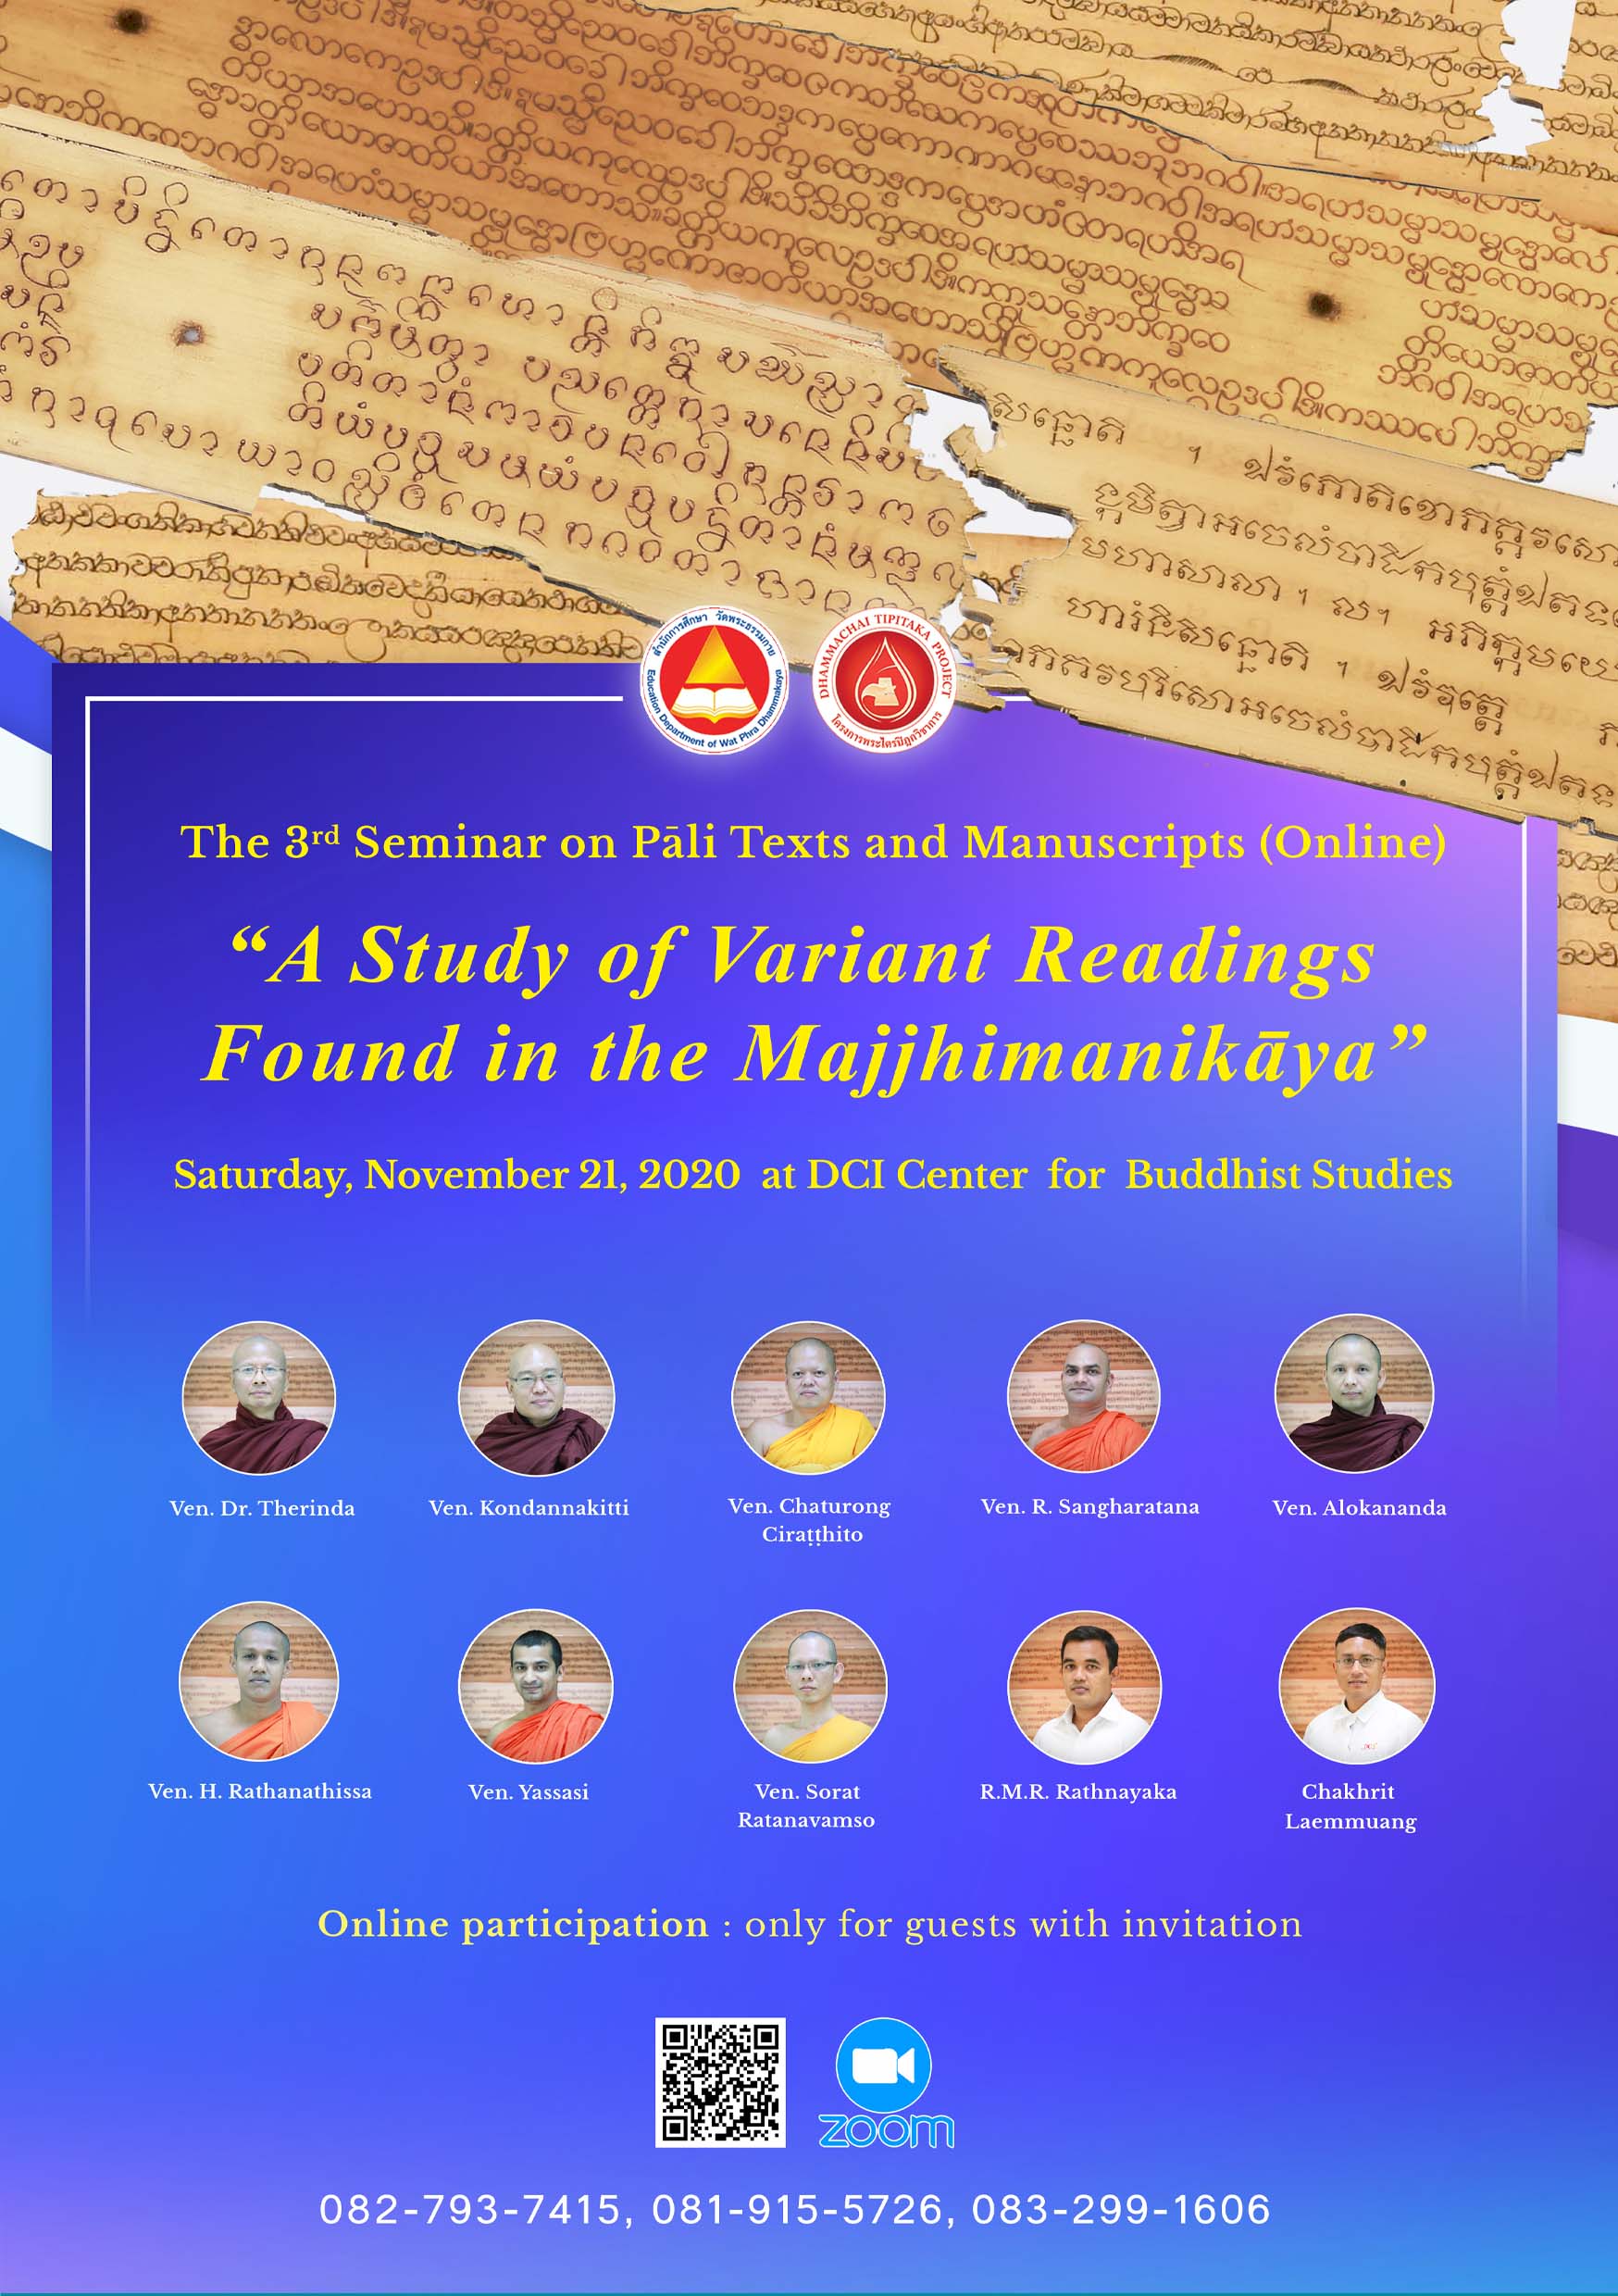 The 3rd Seminar on Pāli Texts and Manuscripts (Online): "A study of Variant Readings Found in the Majjhimanikāya"